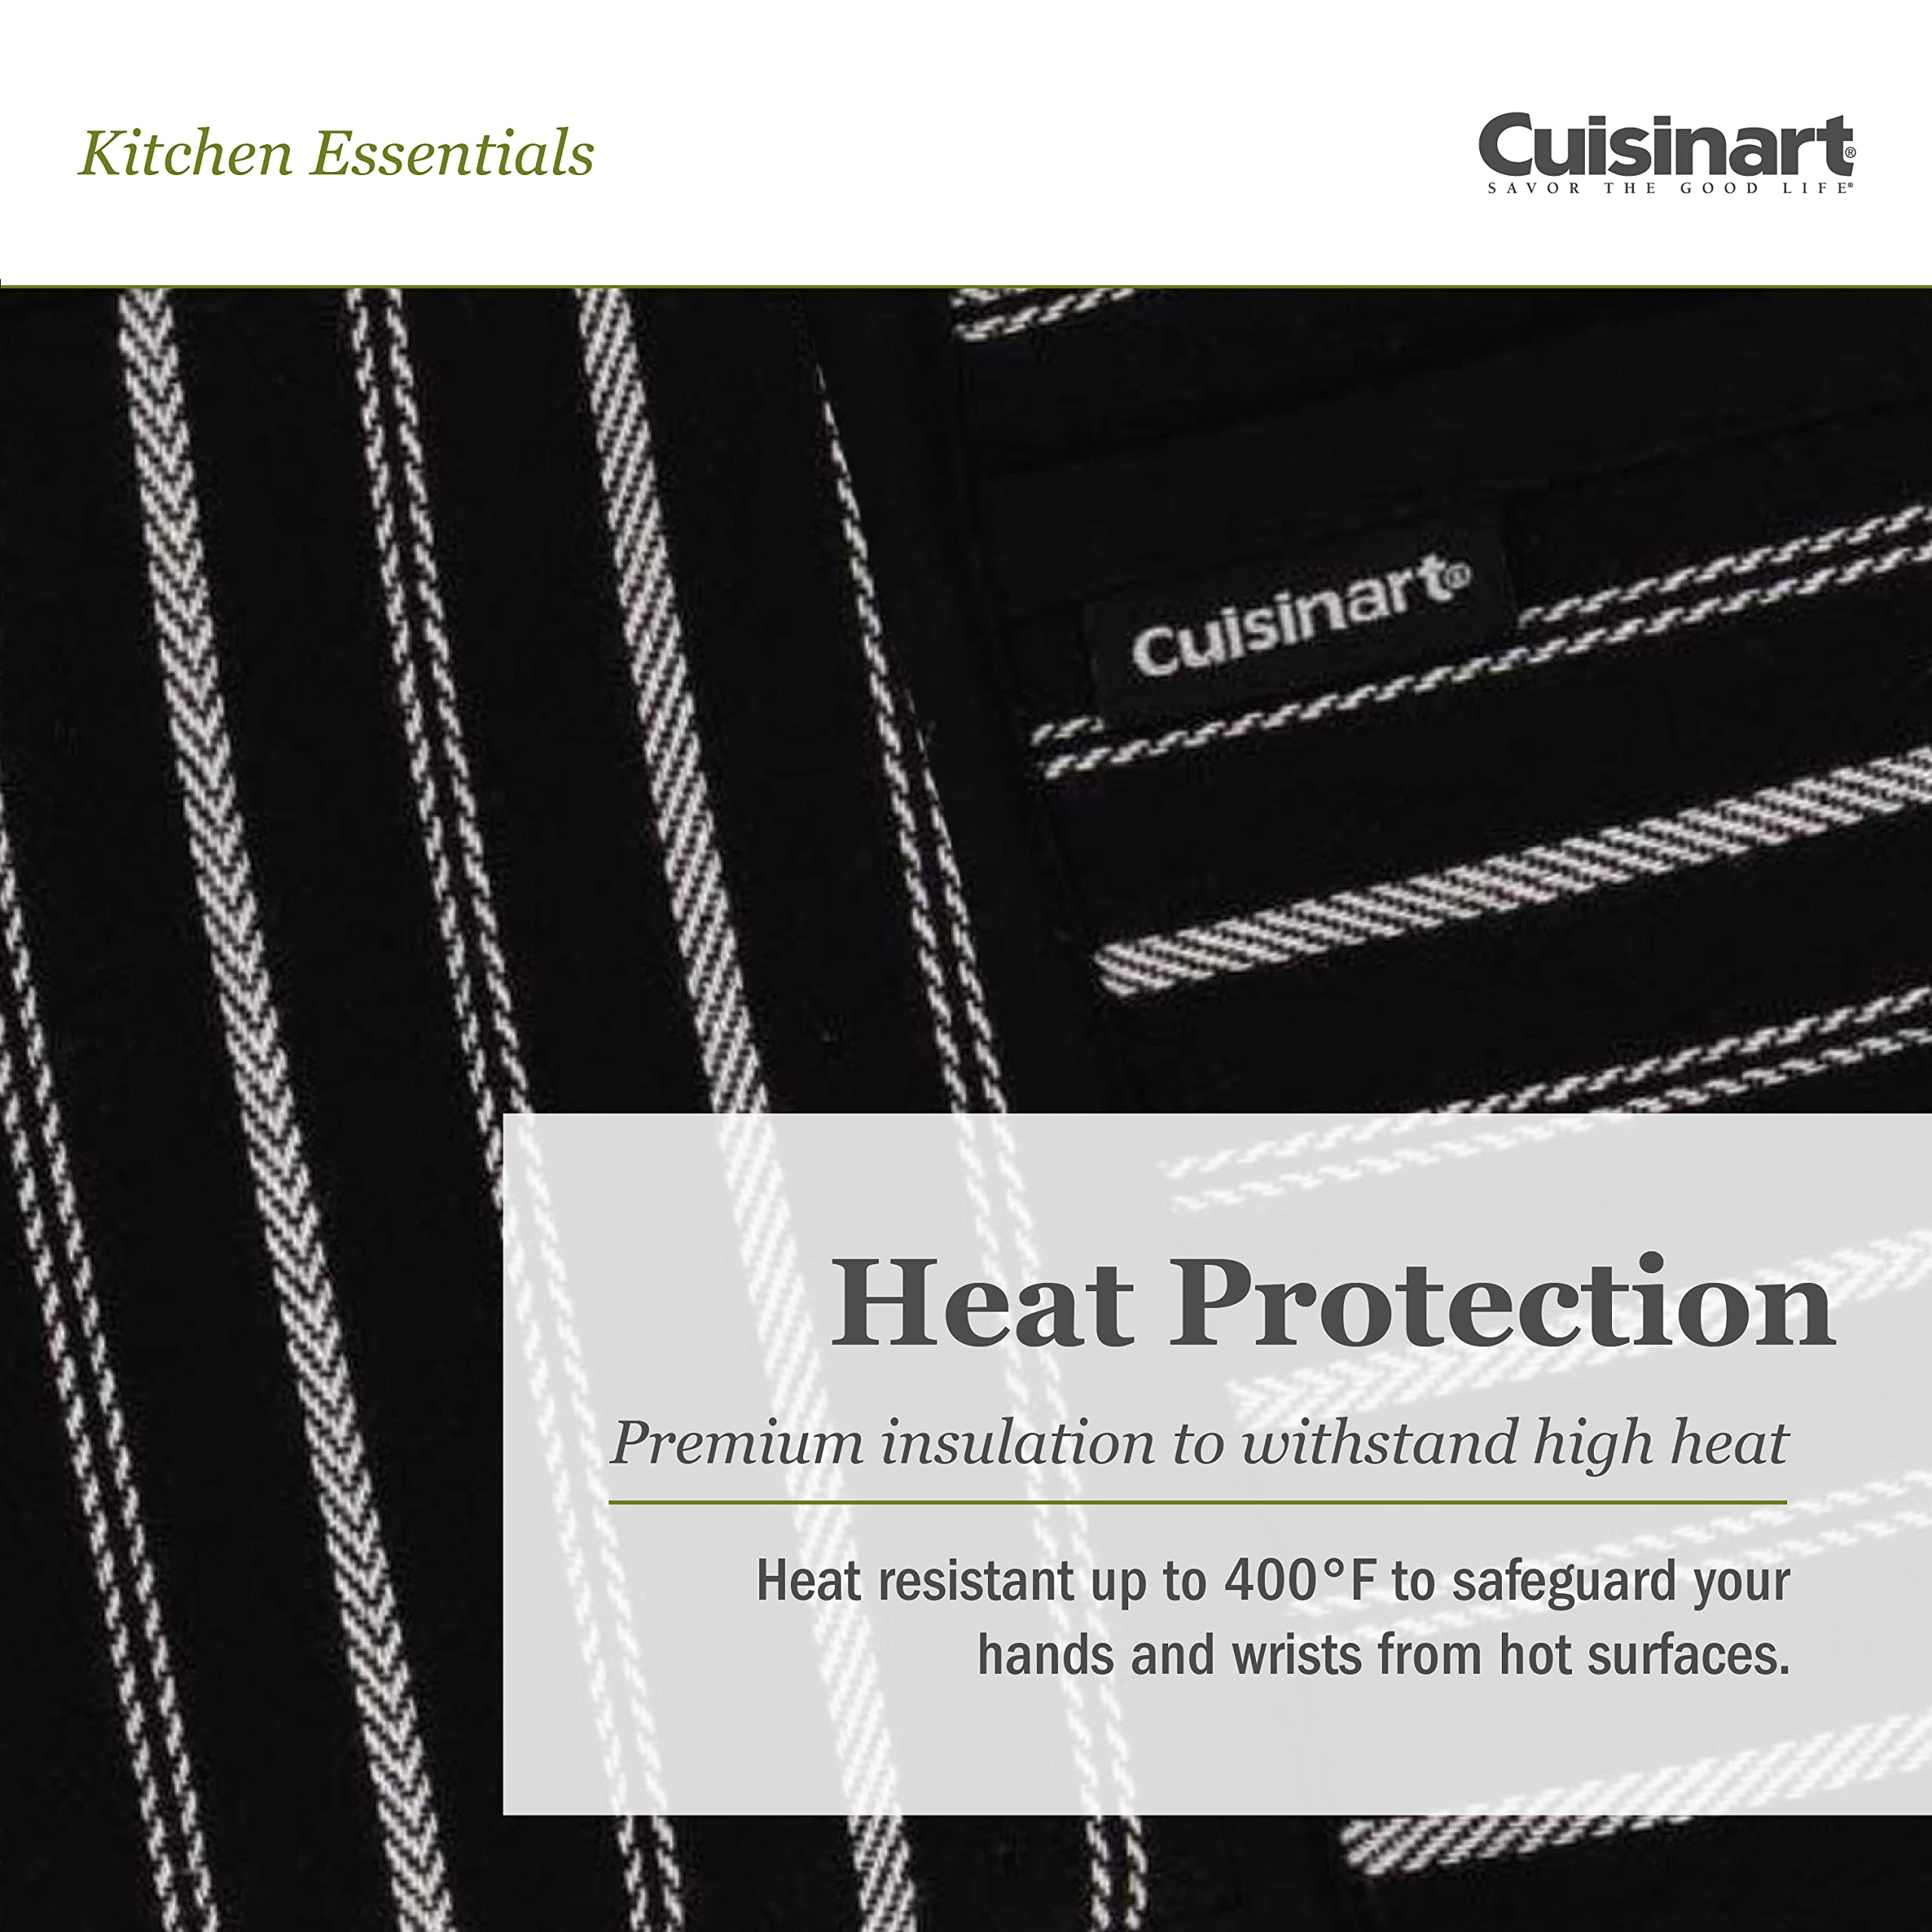 Cuisinart Neoprene Oven Mitts and Potholder Set -Heat Resistant Oven Gloves to Protect Hands and Surfaces with Non-Slip Grip, Hanging Loop-Ideal for Handling Hot Cookware Items, Twill Stripe Jet Black